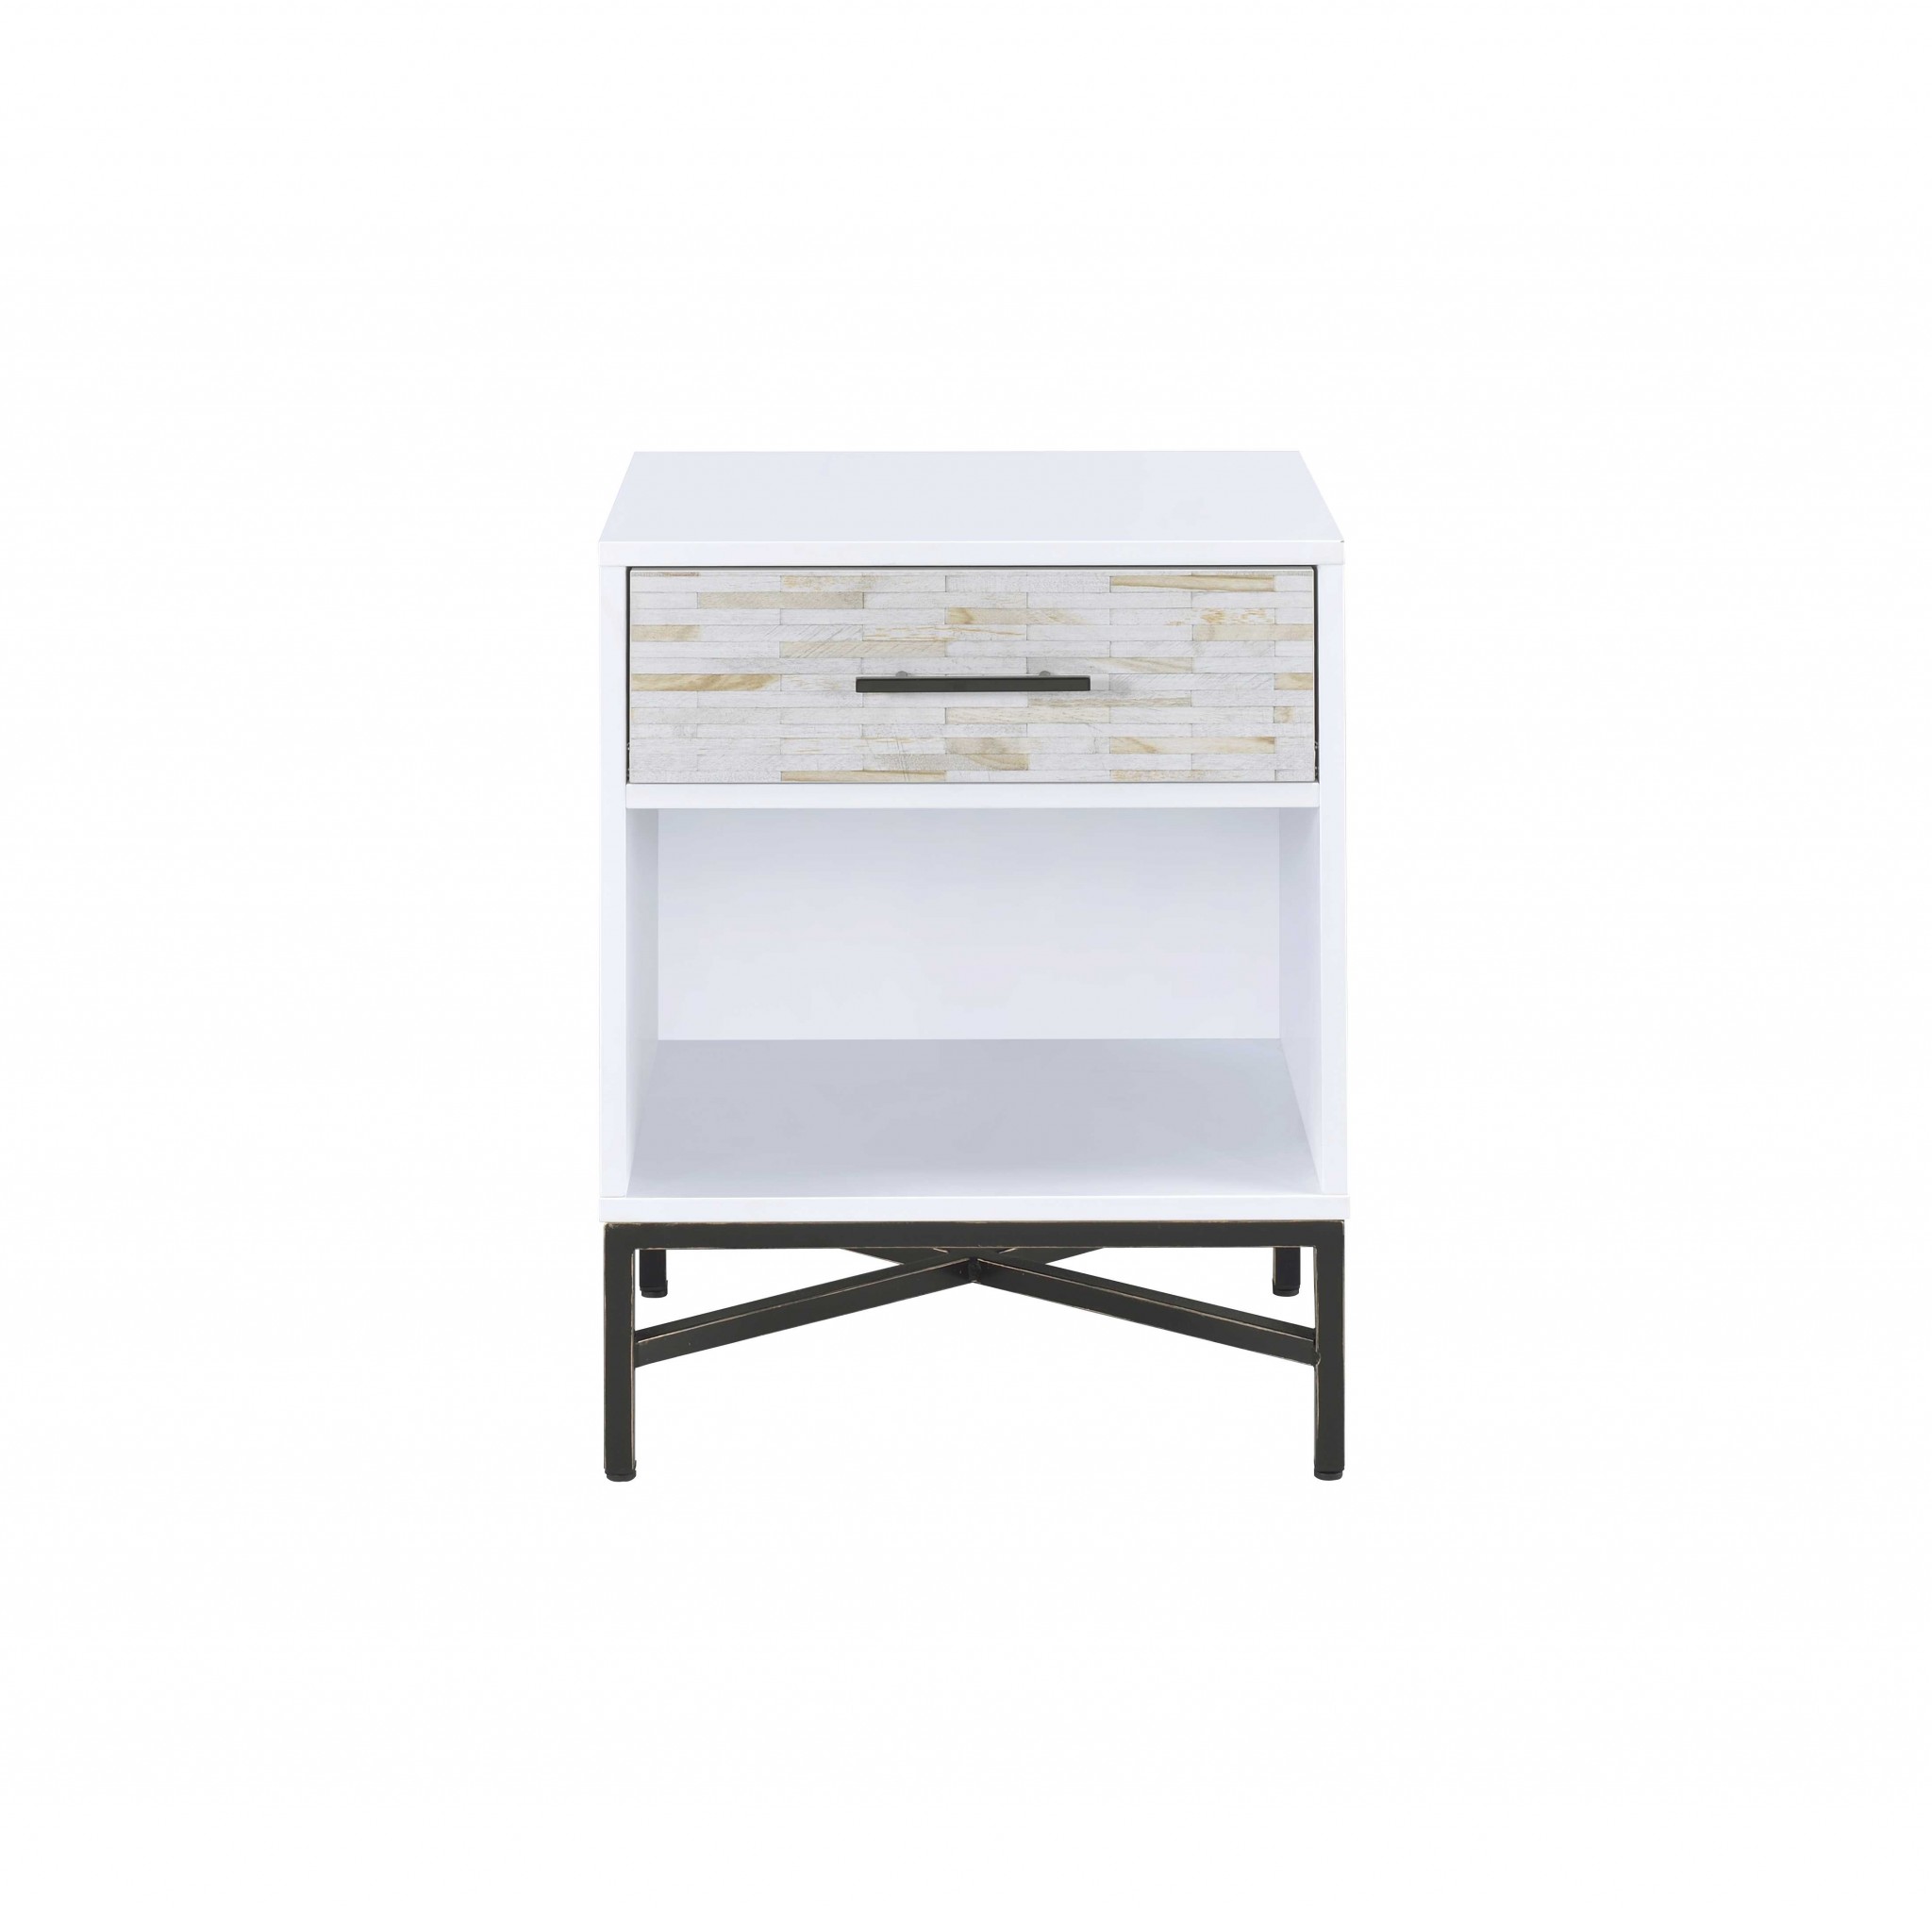 20" X 18" X 26" White And Black Wooden Nightstand